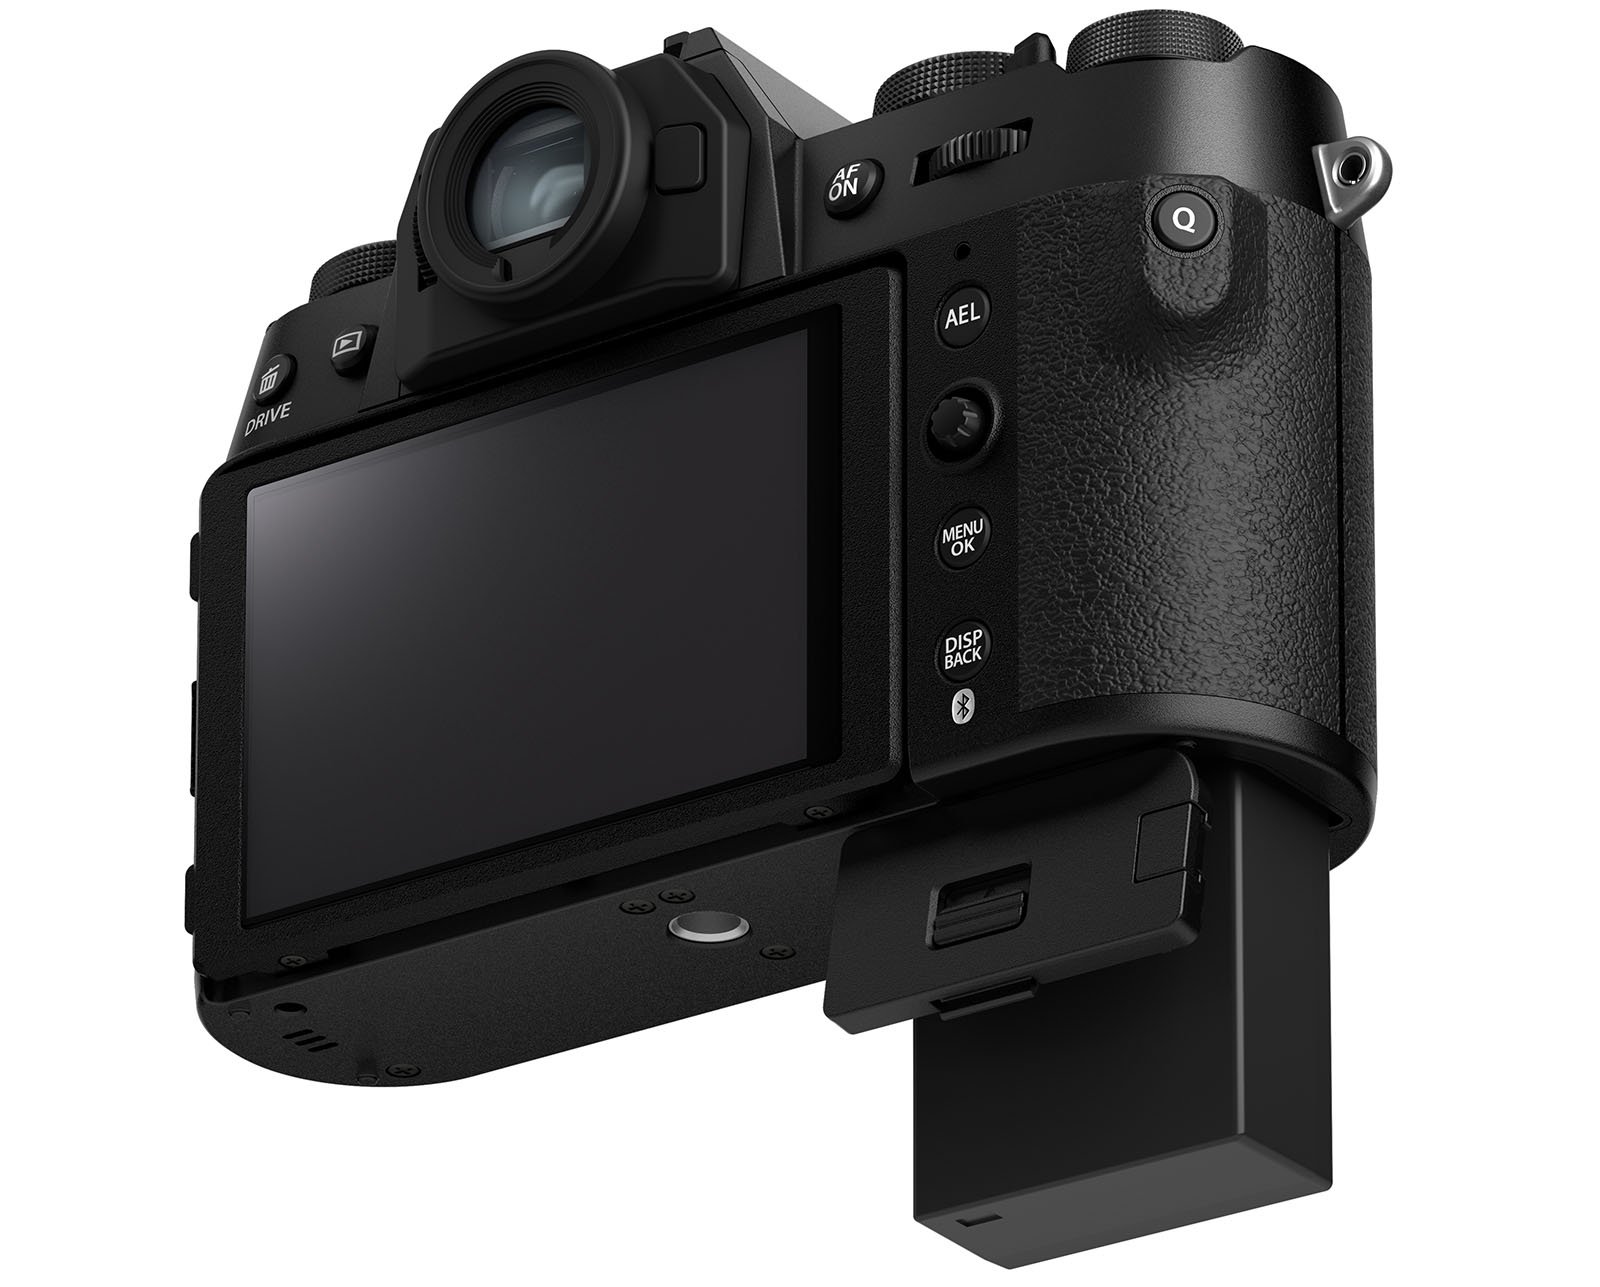 A black digital camera is shown from the back, displaying its LCD screen, control buttons, and adjustable electronic viewfinder. The battery compartment is open, and the battery is partially ejected. The body has a textured grip for better handling.